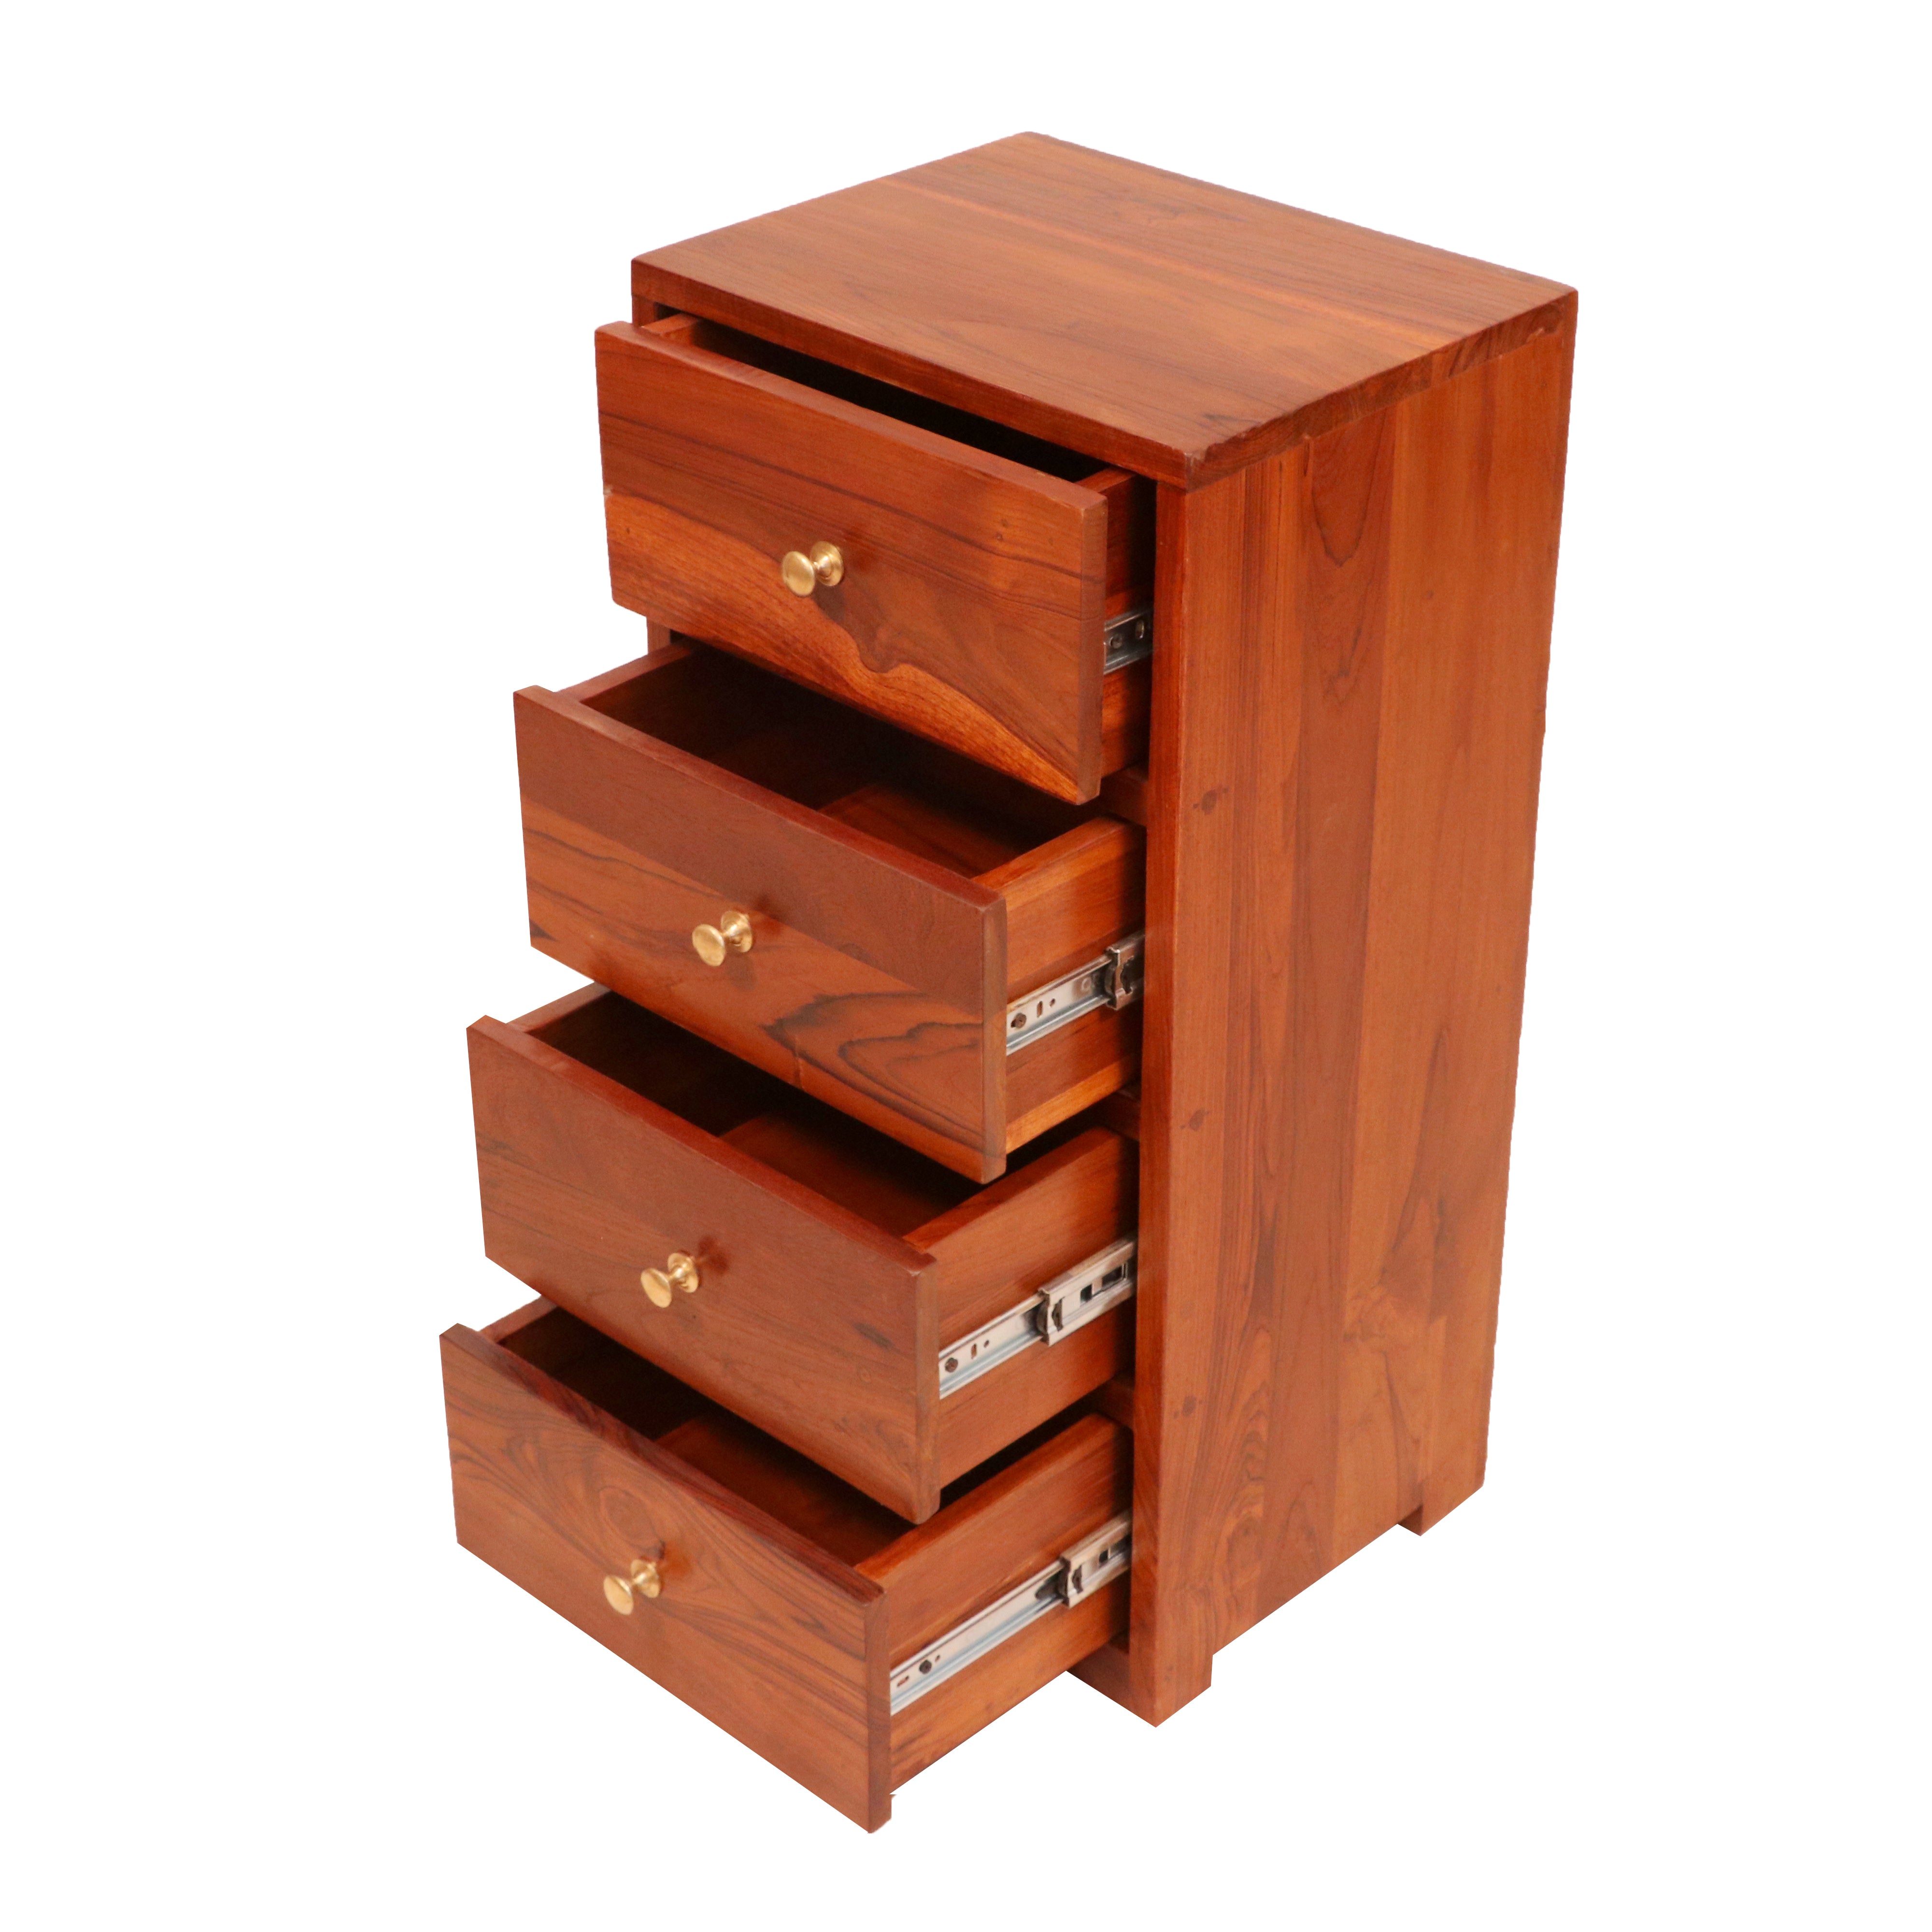 Travers Rede Themed Handmade Classic Wooden four Chest Drawers for Office Drawer's Chest